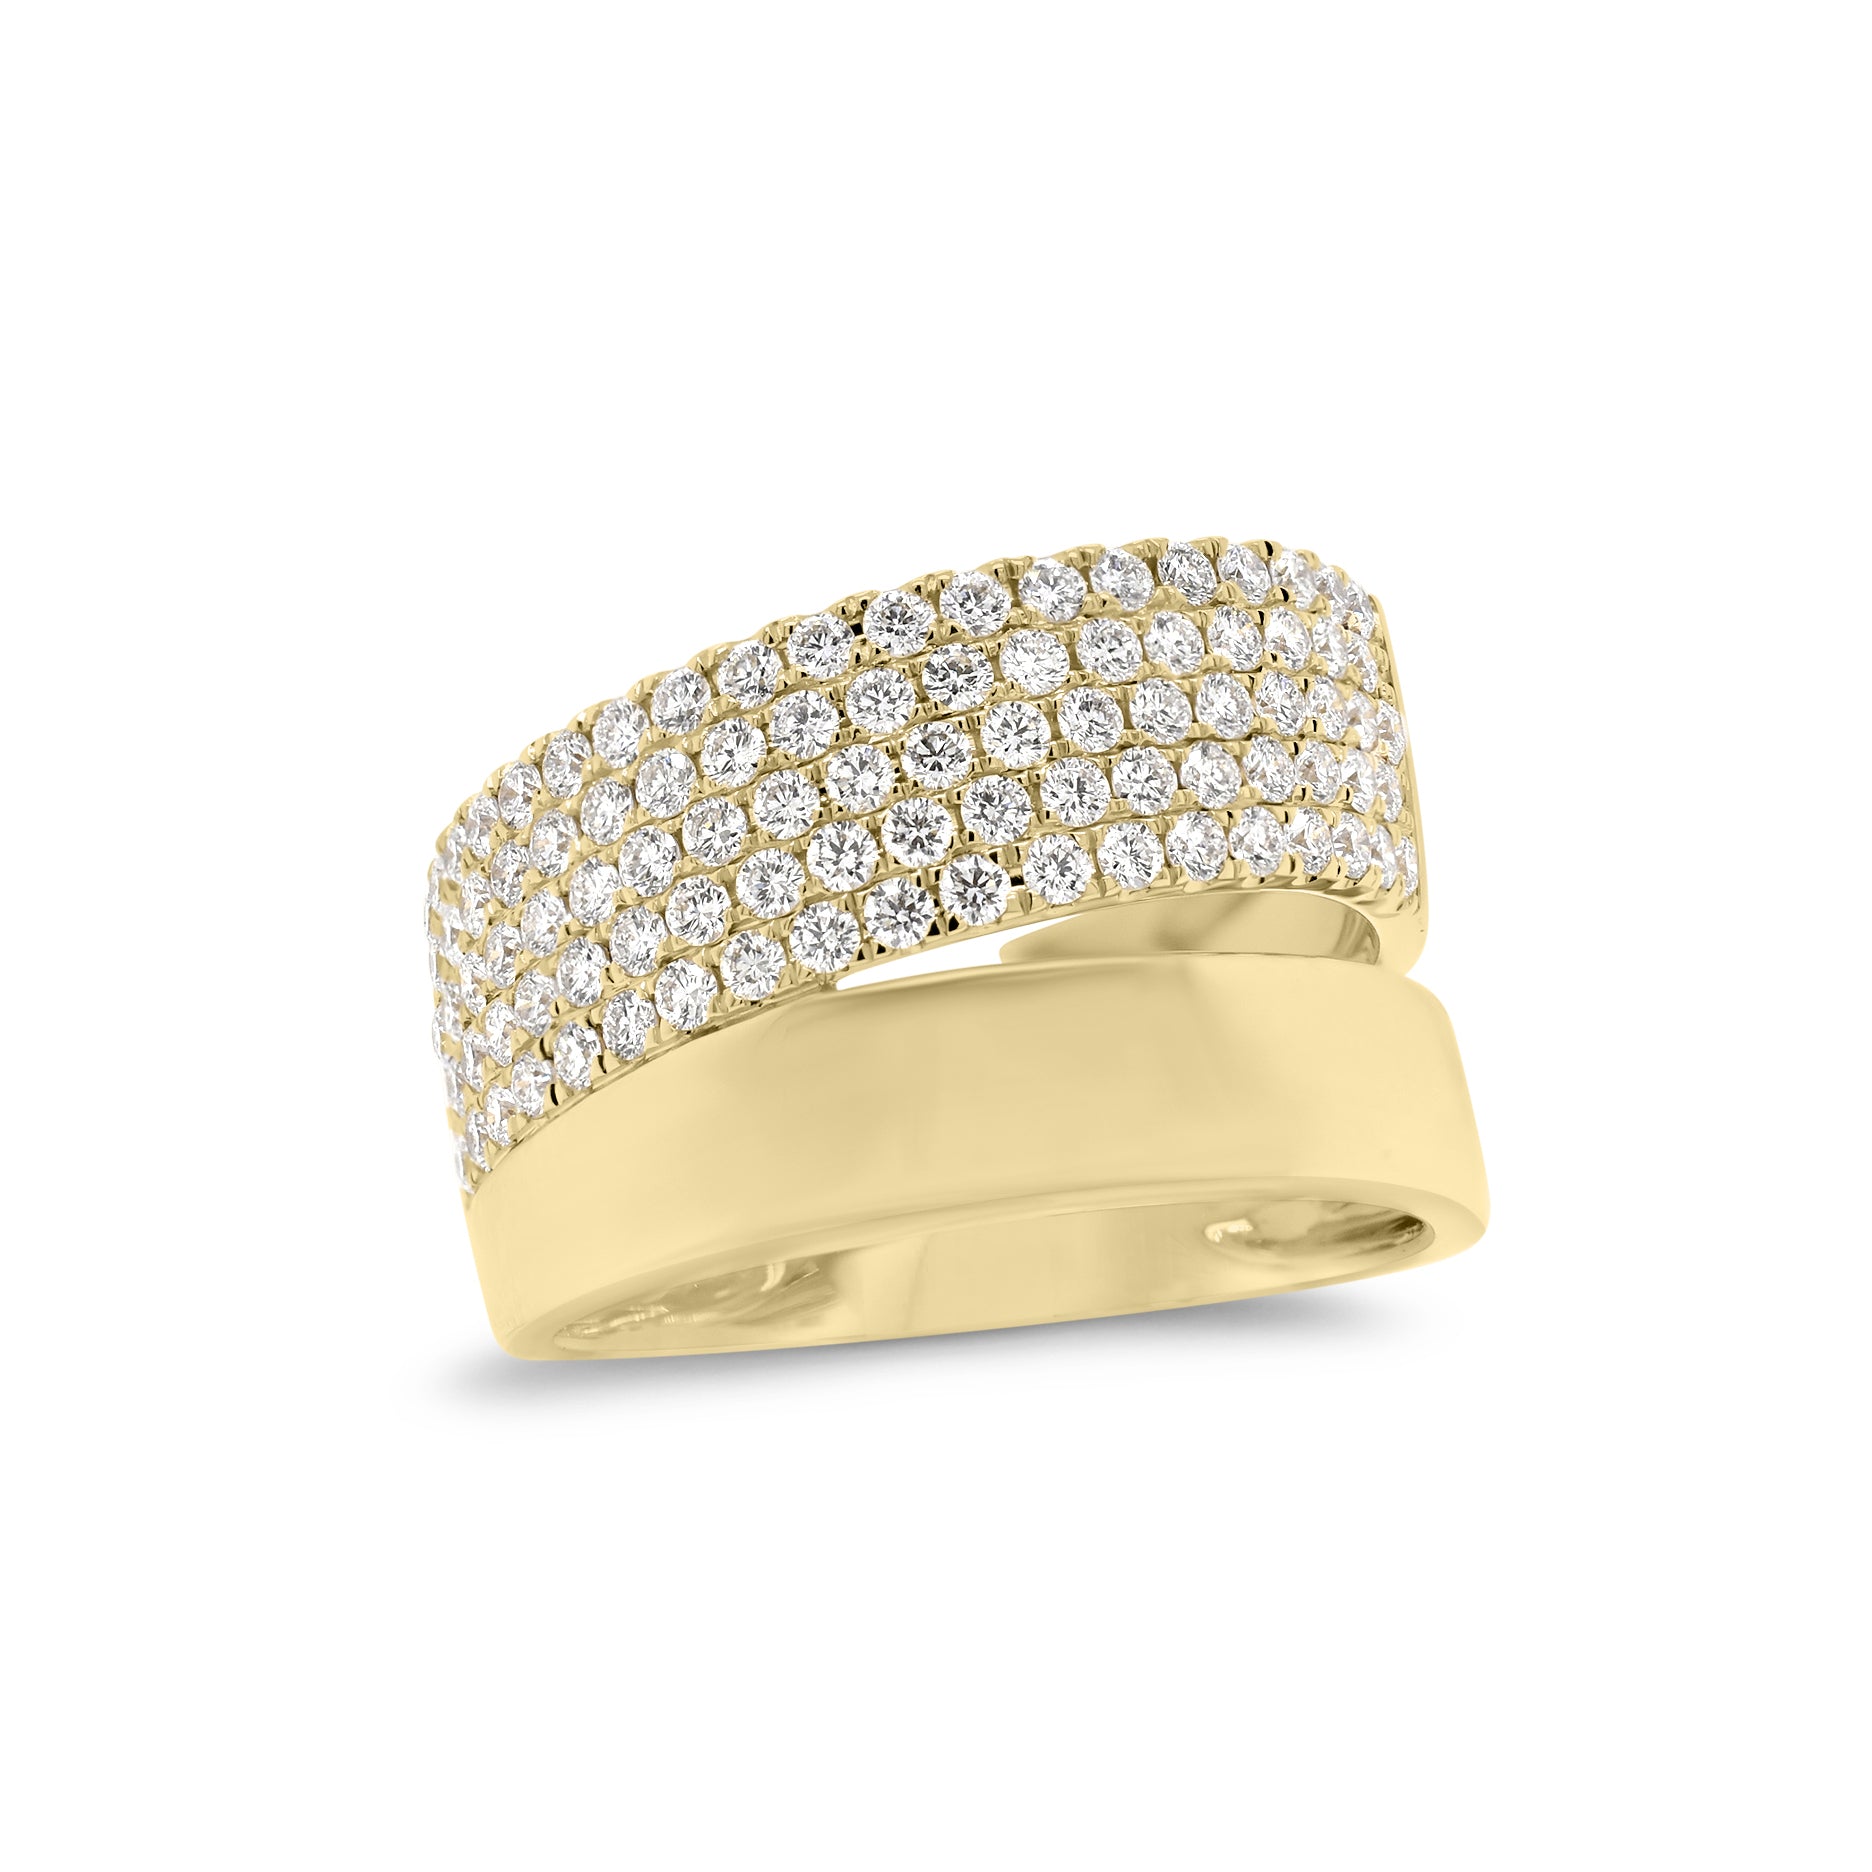 Pave Diamond & Gold Double Band Ring  -14 K Gold  - 1.03 carats of round diamonds